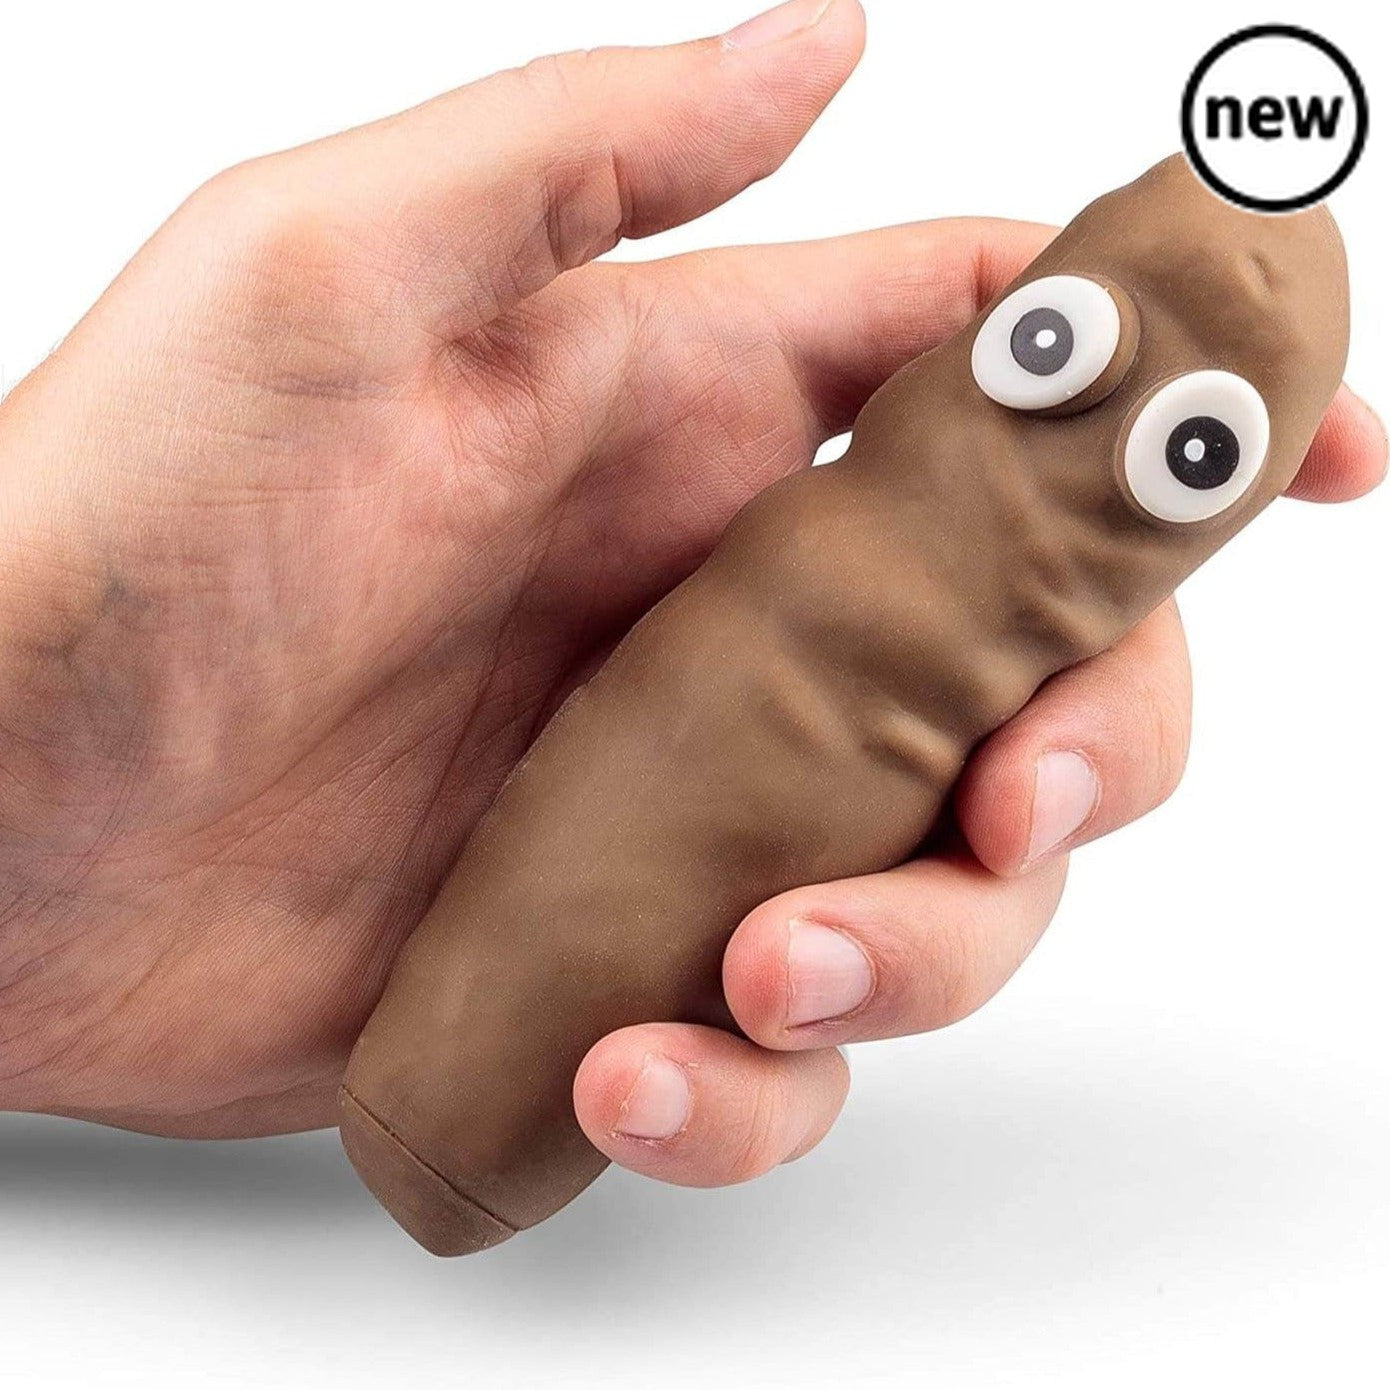 Super Stretchy Poo, Squishy stretchy poop that can be squeezed into a variety of shapes. The filling inside allows this wide-eyed poop to retain new shapes after it has been pushed and pulled about, but can always be returned to its original dimensions with a bit of gentle kneading. This fun novelty toy is a great party bag filler, funny gift, or even a good stress reliever. An excellent fidget toy to squeeze and poke when needing a calming fidget. Super squishy and wobbly Great gift for kids or adults Good